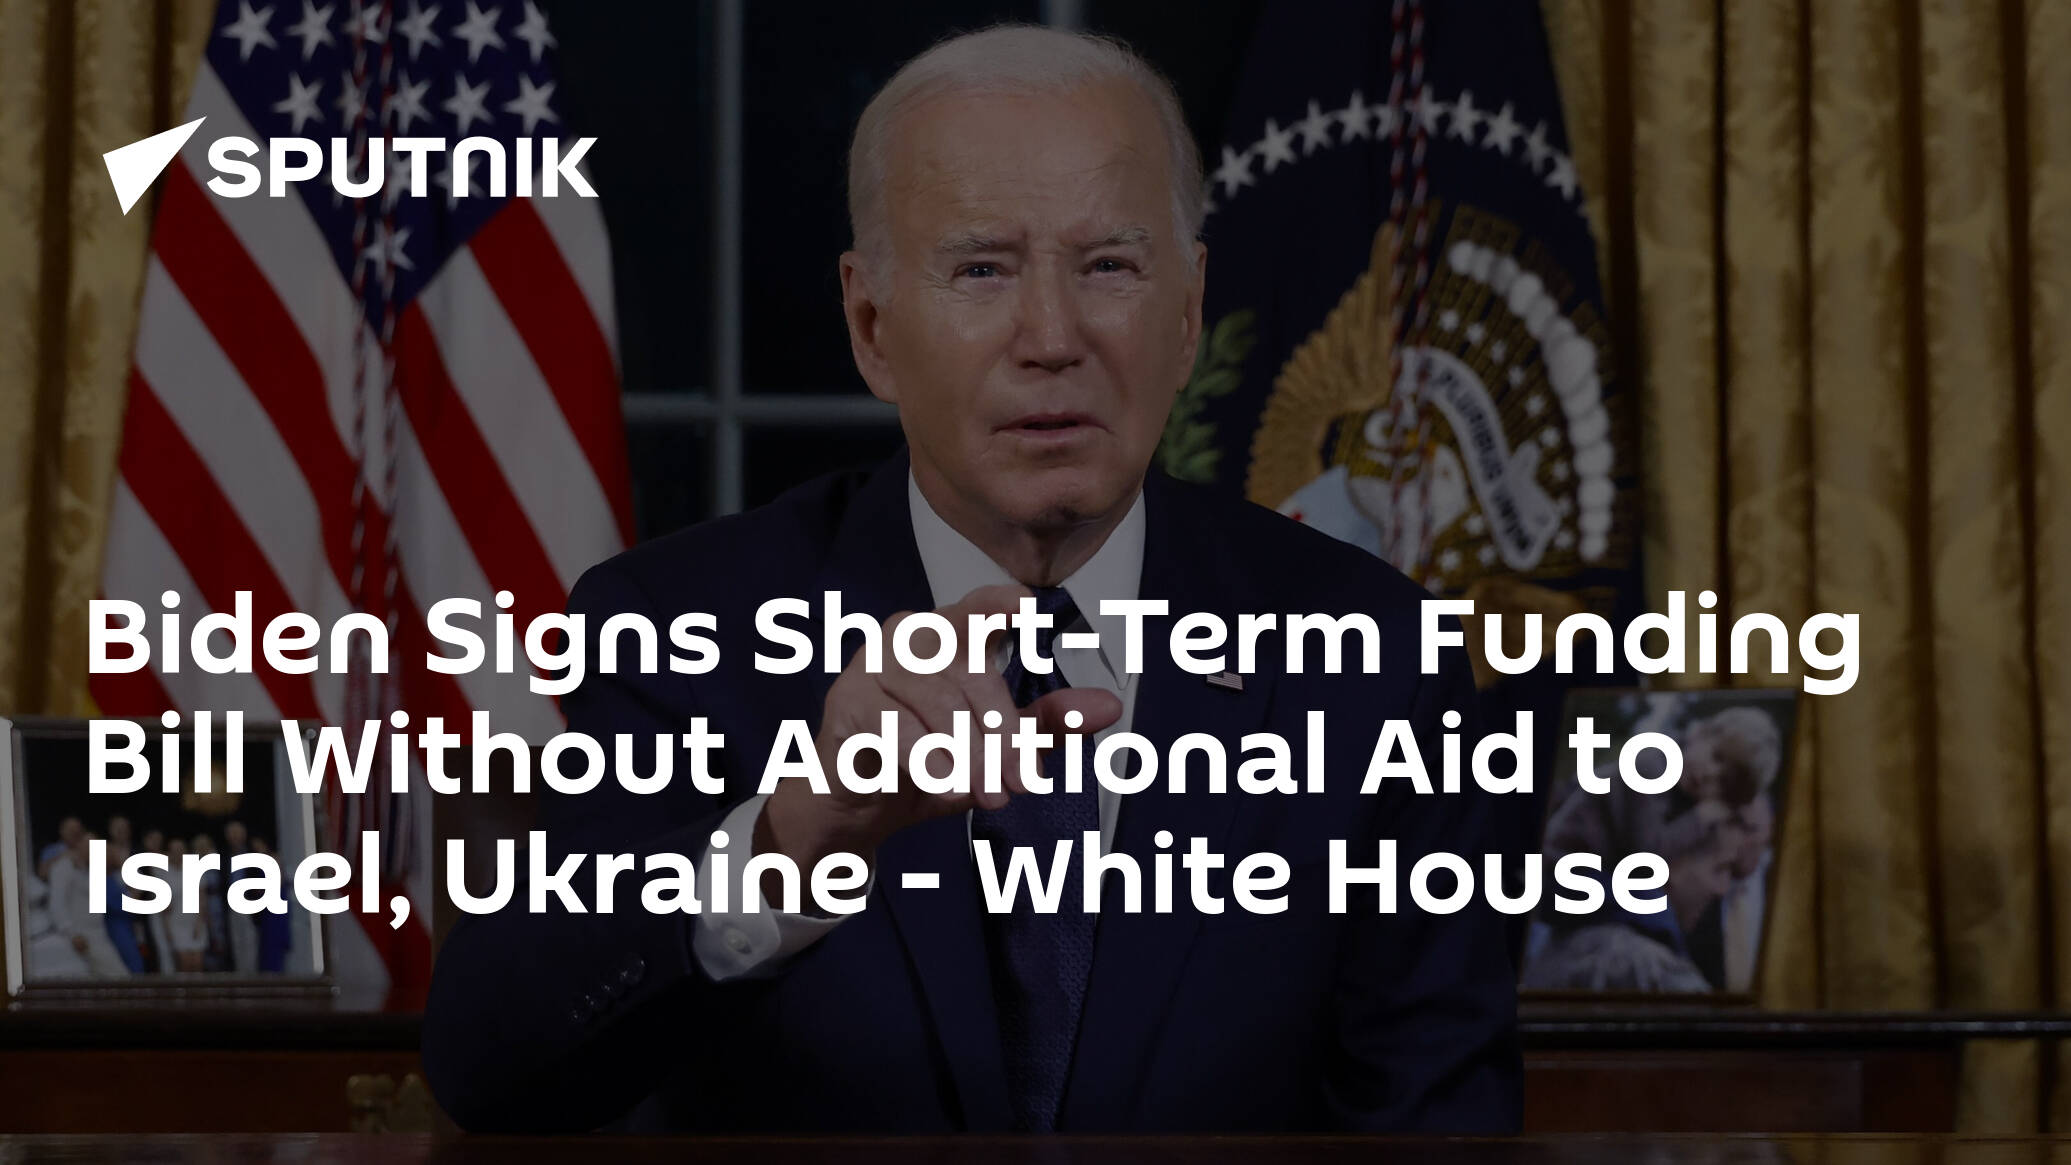 Biden Signs Short-Term Funding Bill Without Additional Aid to Israel, Ukraine – White House